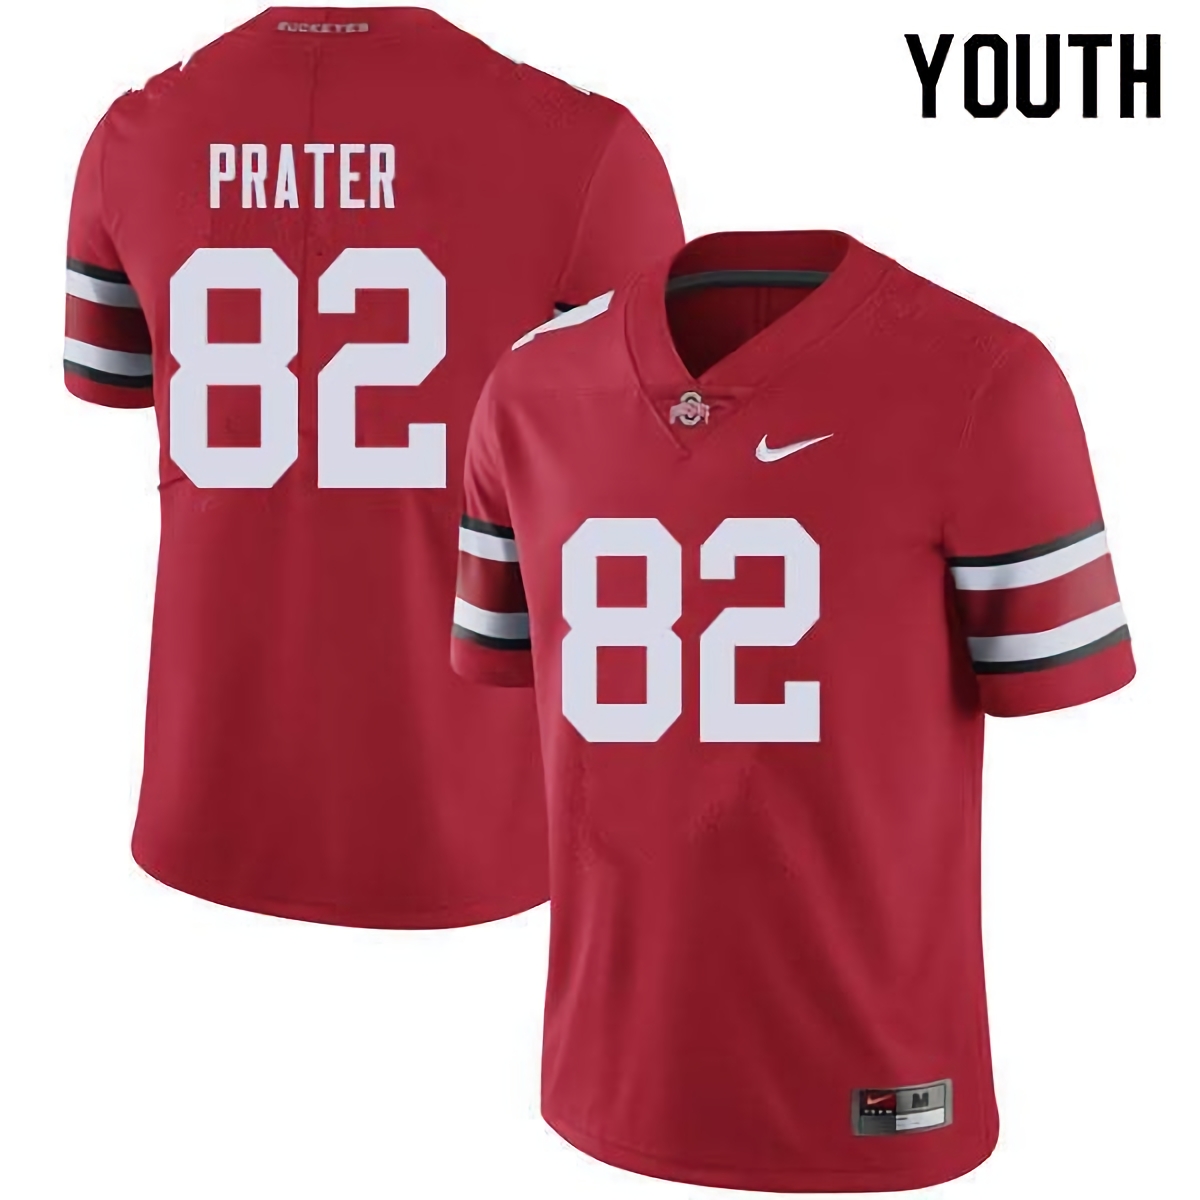 Garyn Prater Ohio State Buckeyes Youth NCAA #82 Nike Red College Stitched Football Jersey ISN7556LT